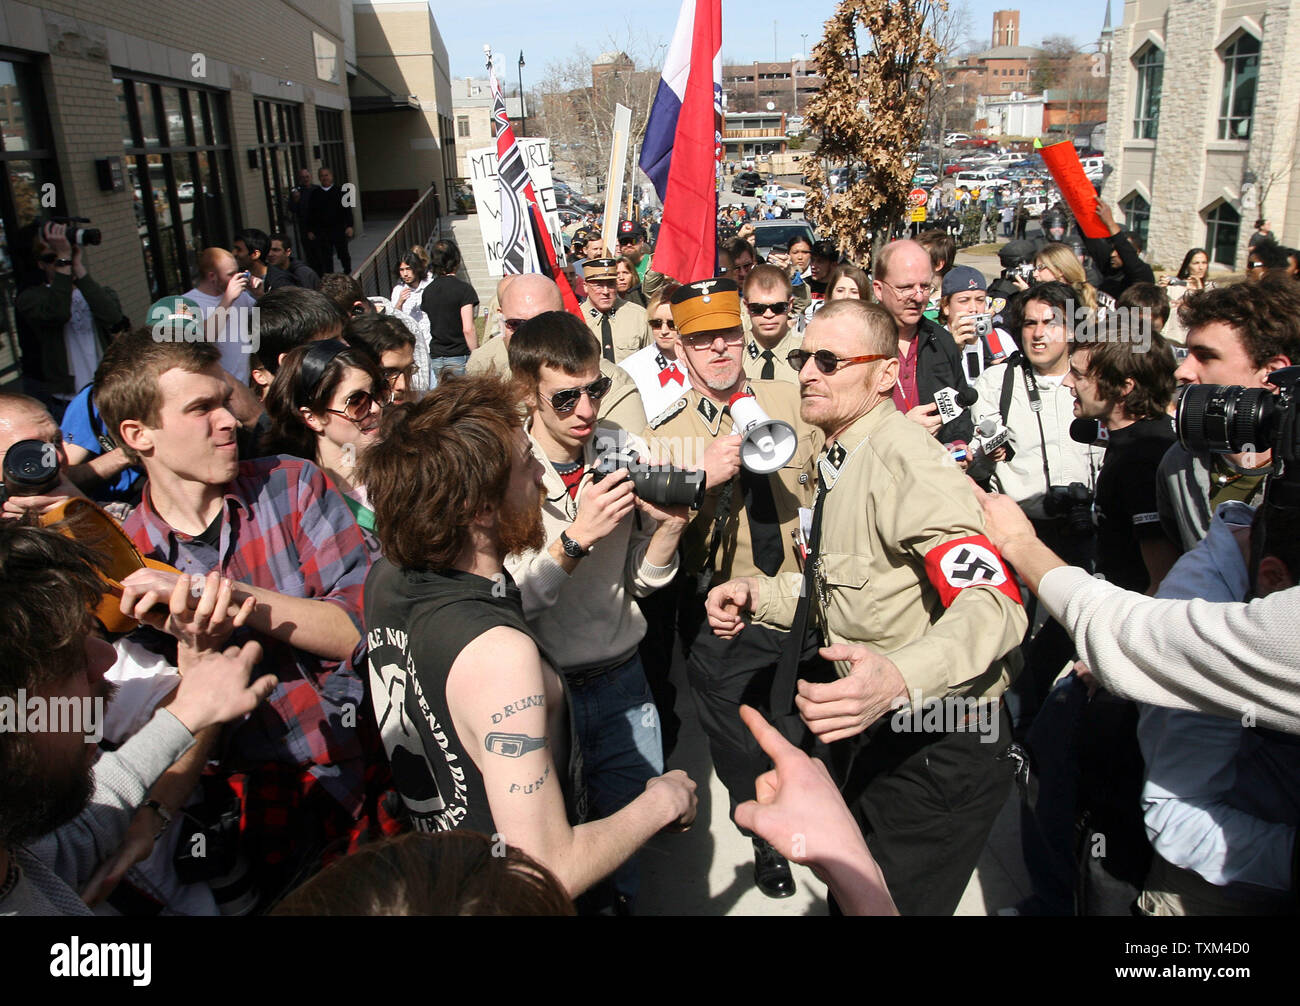 Protesters exchange shoves with members of the National Socialist Movement during their march on the campus of the University of Missouri in Columbia, Missouri on March 10, 2007. About 20 marchers were met by throngs of students that cursed them and tossed eggs into their march. (UPI Photo/Bill Greenblatt) Stock Photo